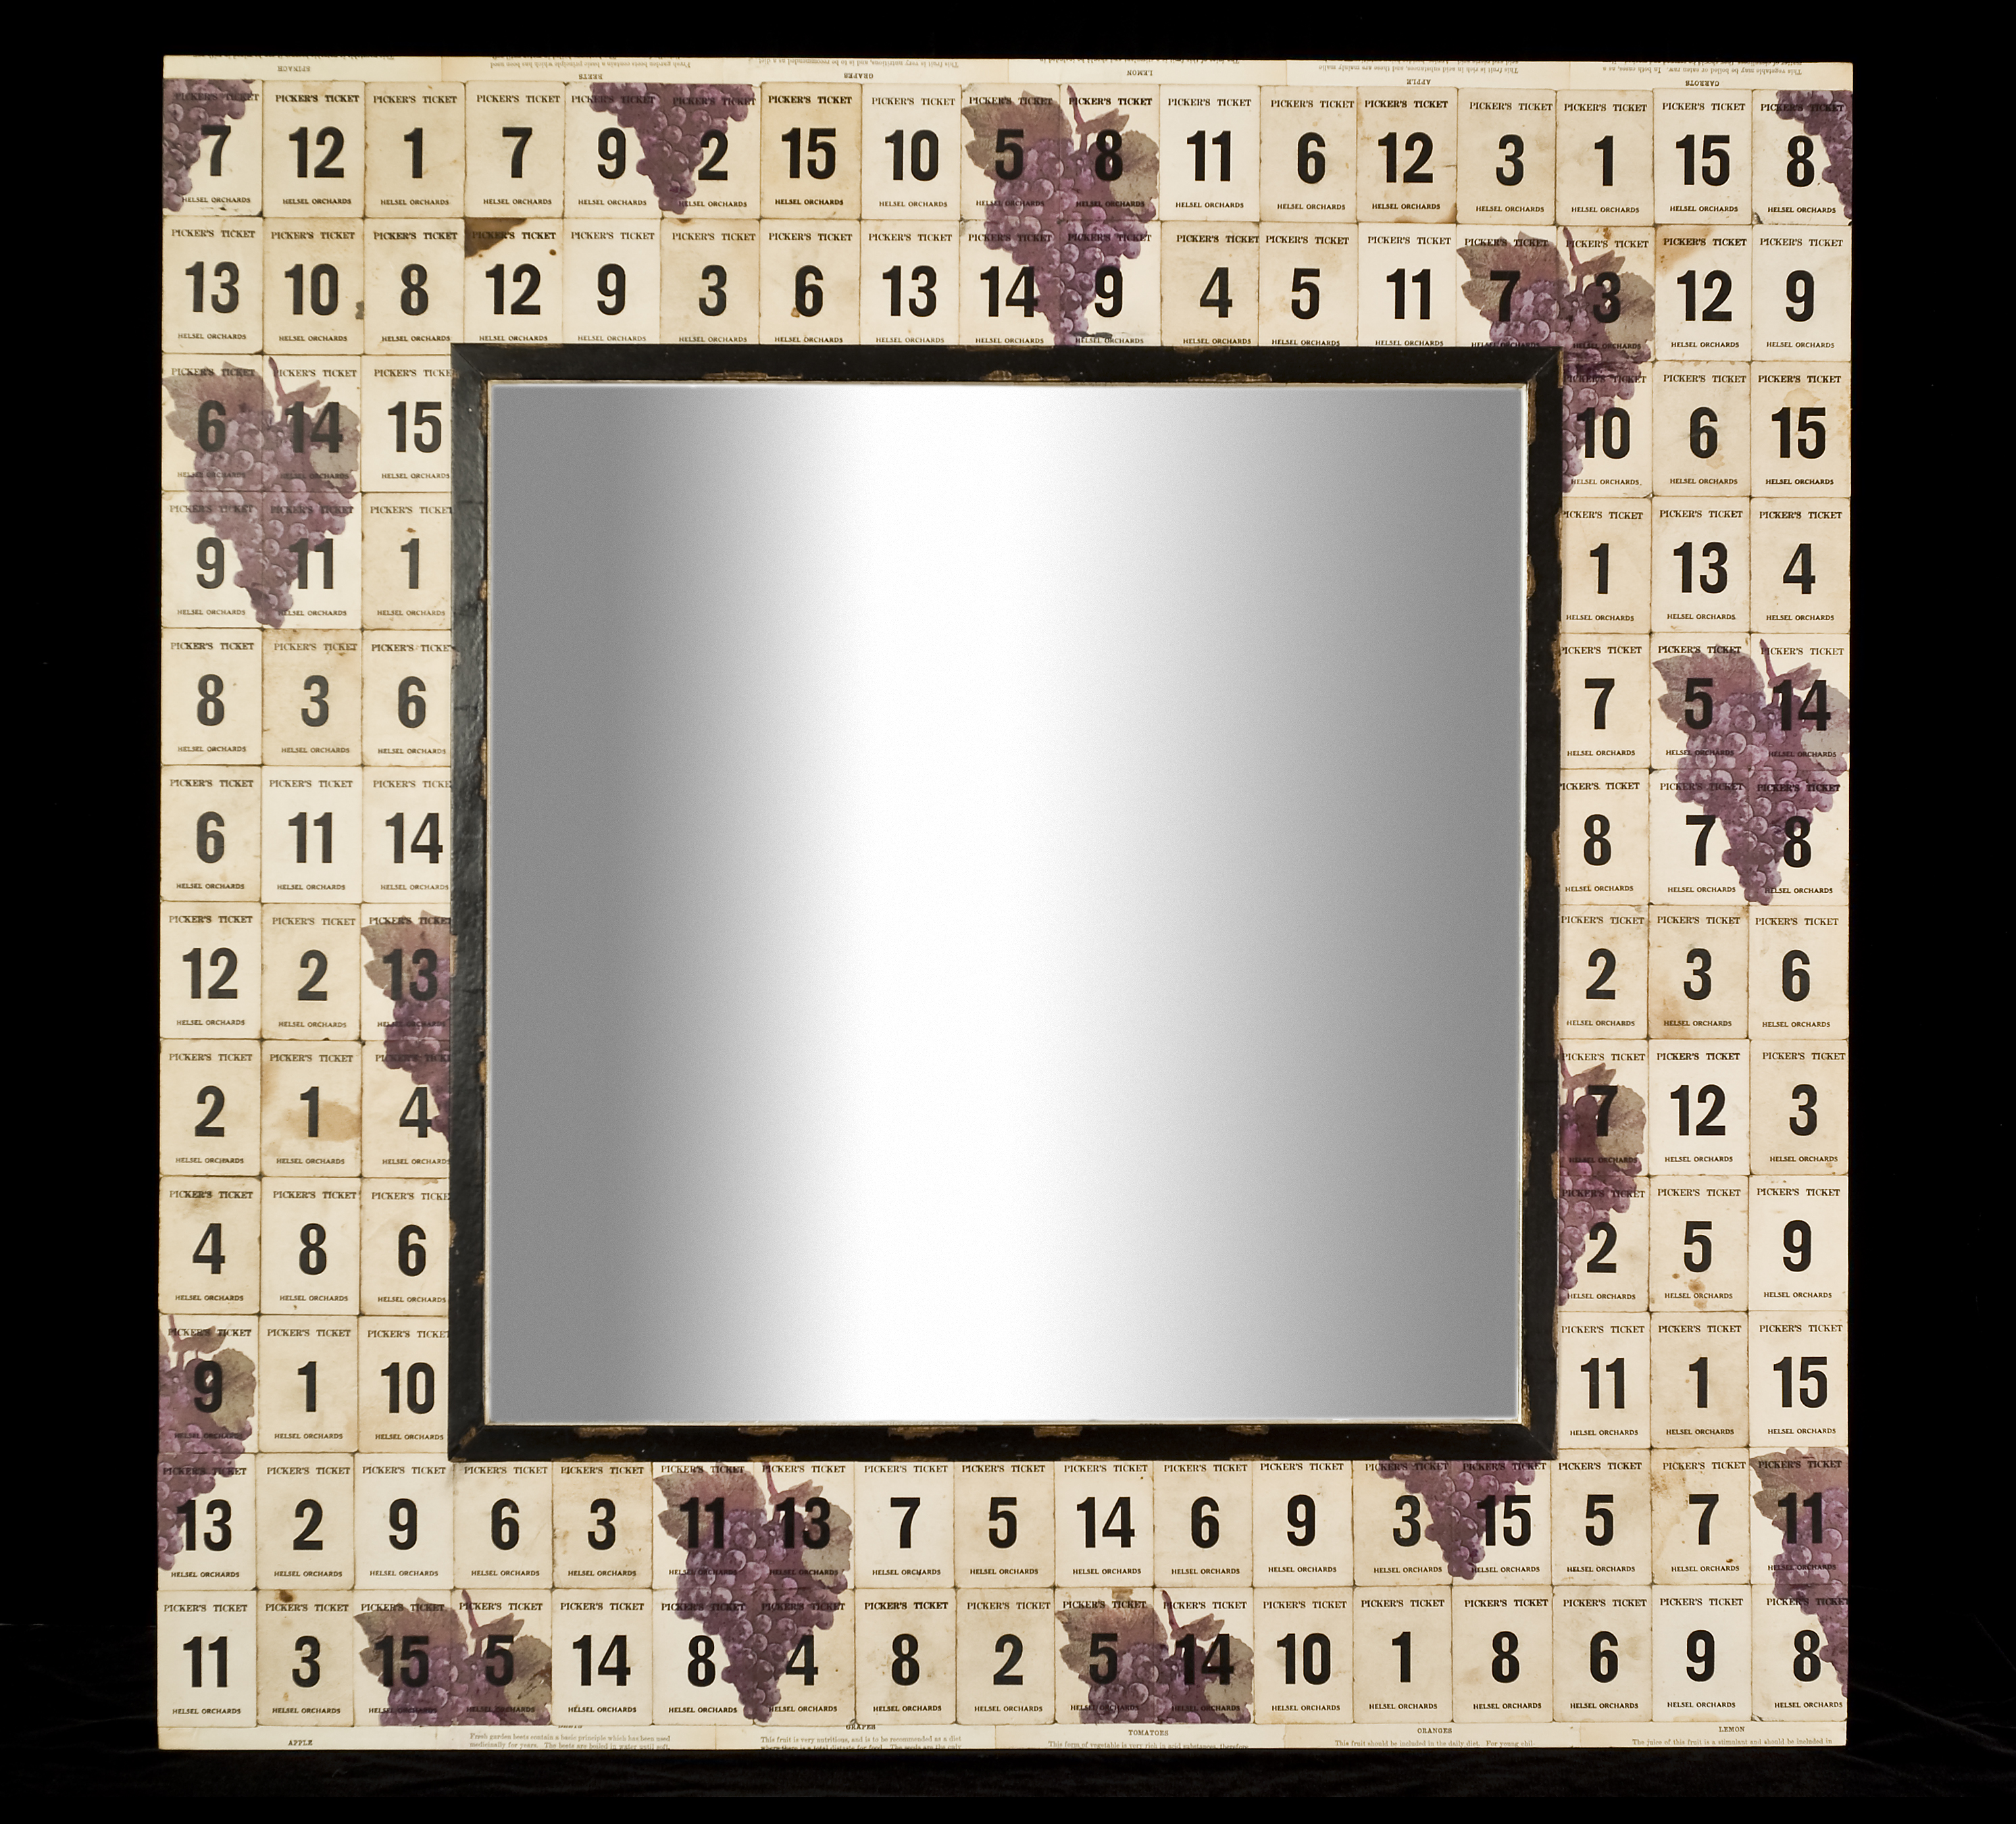     \"Orchard Mirror\"
    assemblage
    40\" w x 40\" h x 1\"d
    2009

    SOLD

    Mirror w/ mitered pine frame covered in pickers tickets from a northern Michigan orchard, some printed with bunches of grapes, wood trim, pages about medicinal uses of fruits & vegetables from an early 20th c. home health book, wax 